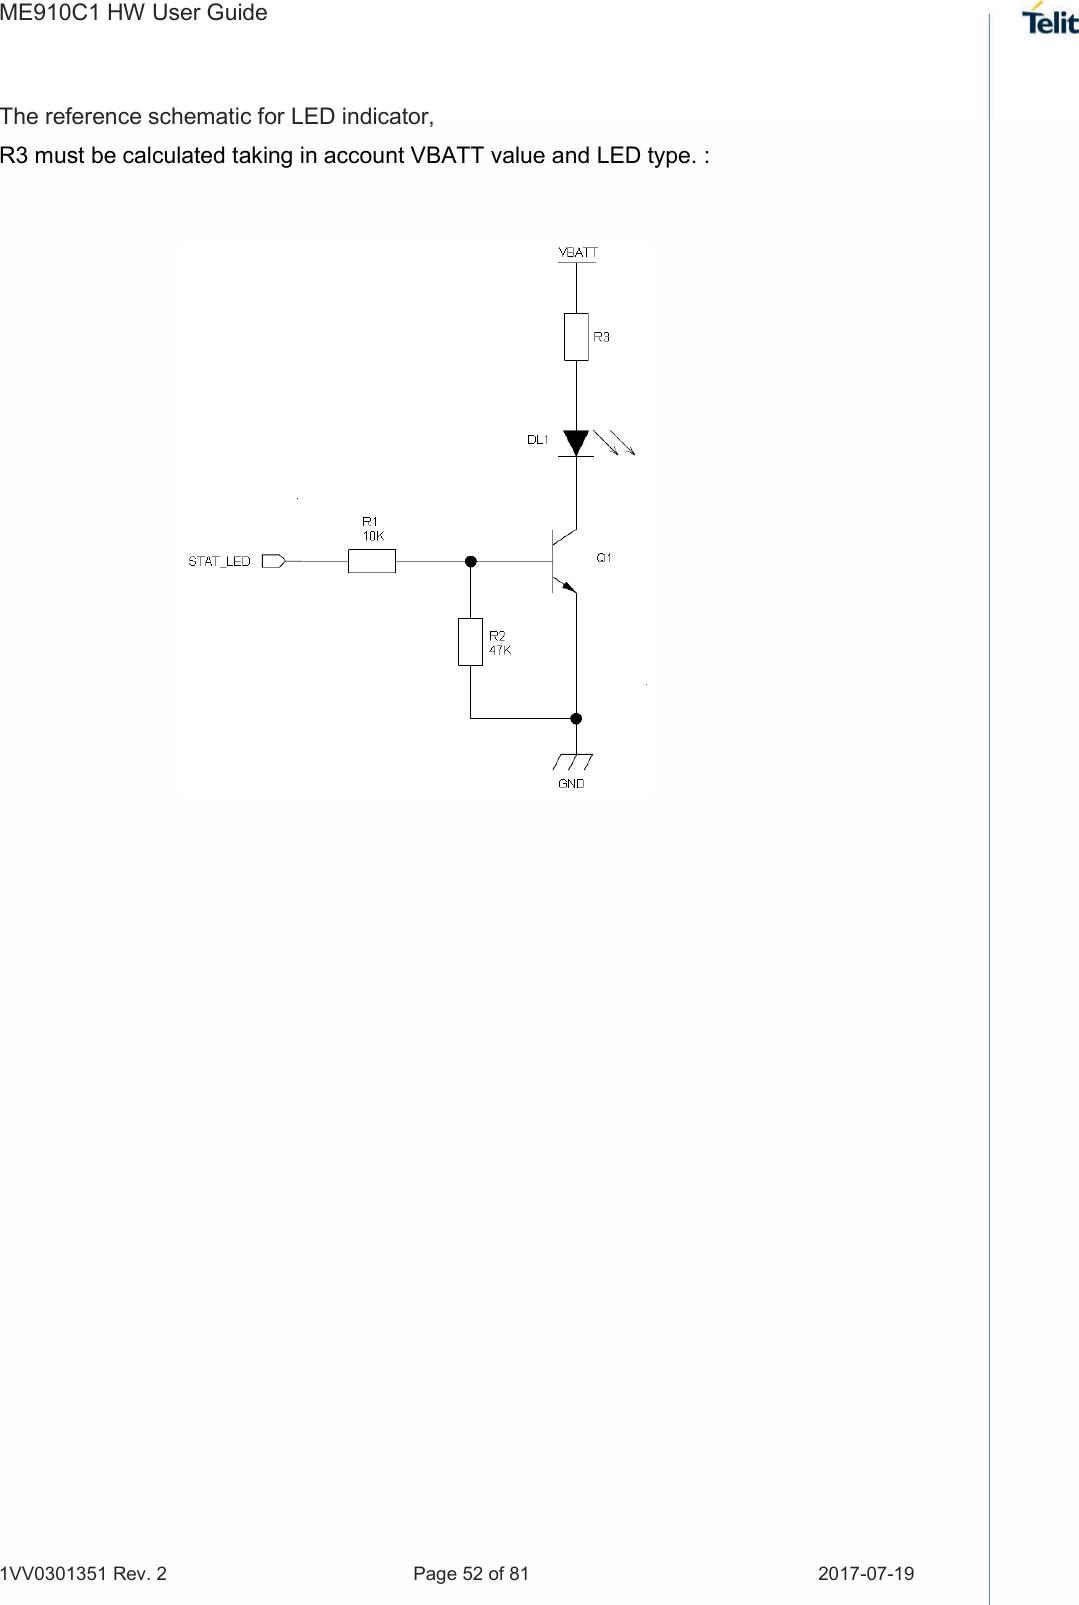 ME910C1 HW User Guide 1VV0301351 Rev. 2  Page 52 of 81  2017-07-19  The reference schematic for LED indicator,  R3 must be calculated taking in account VBATT value and LED type. :                    